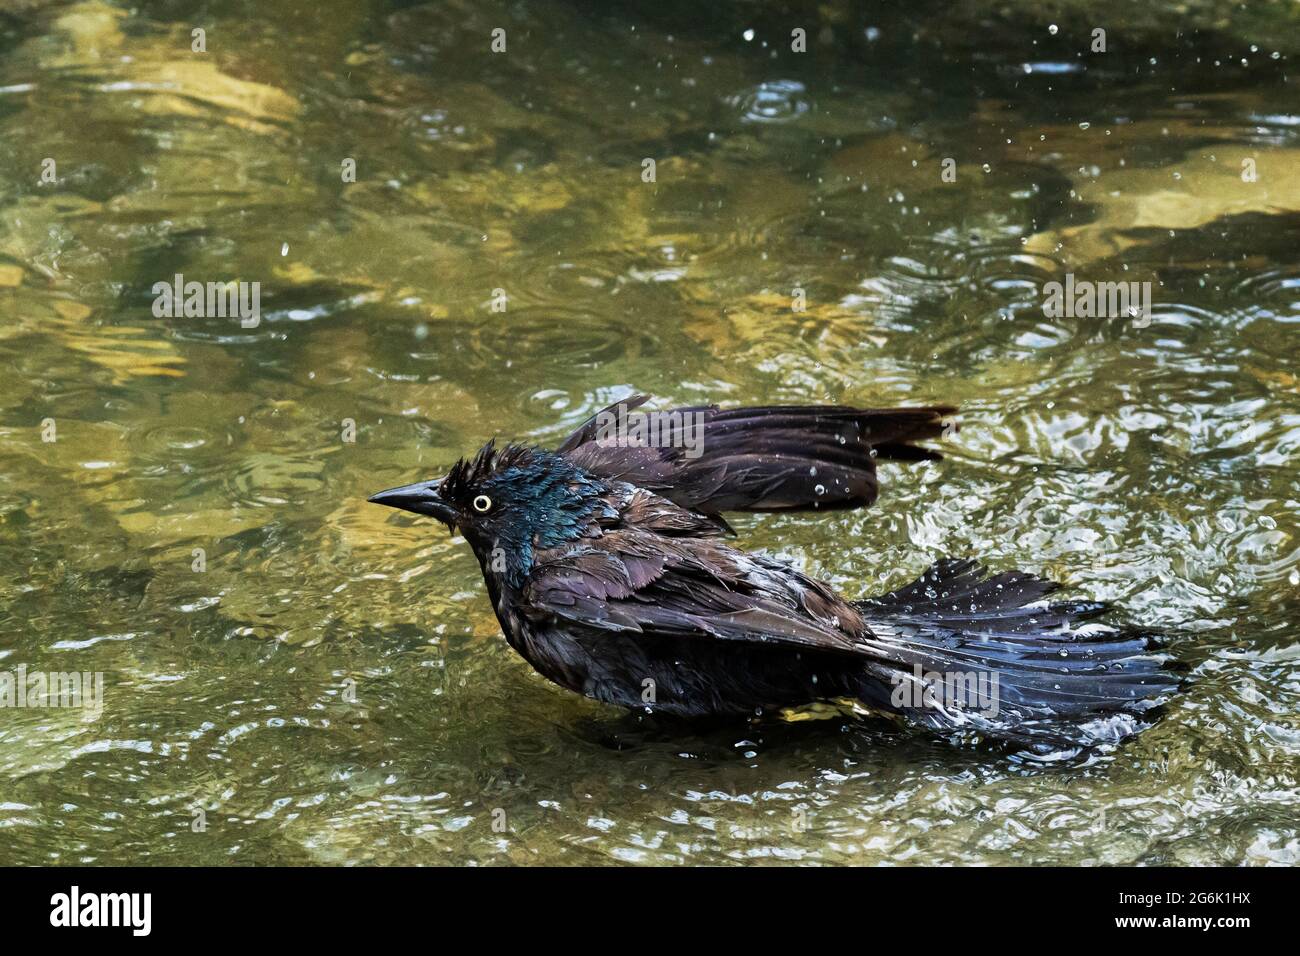 Common Grackle, (Quiscalus quiscula), taking a bath, Adult Bird Bathing Stock Photo